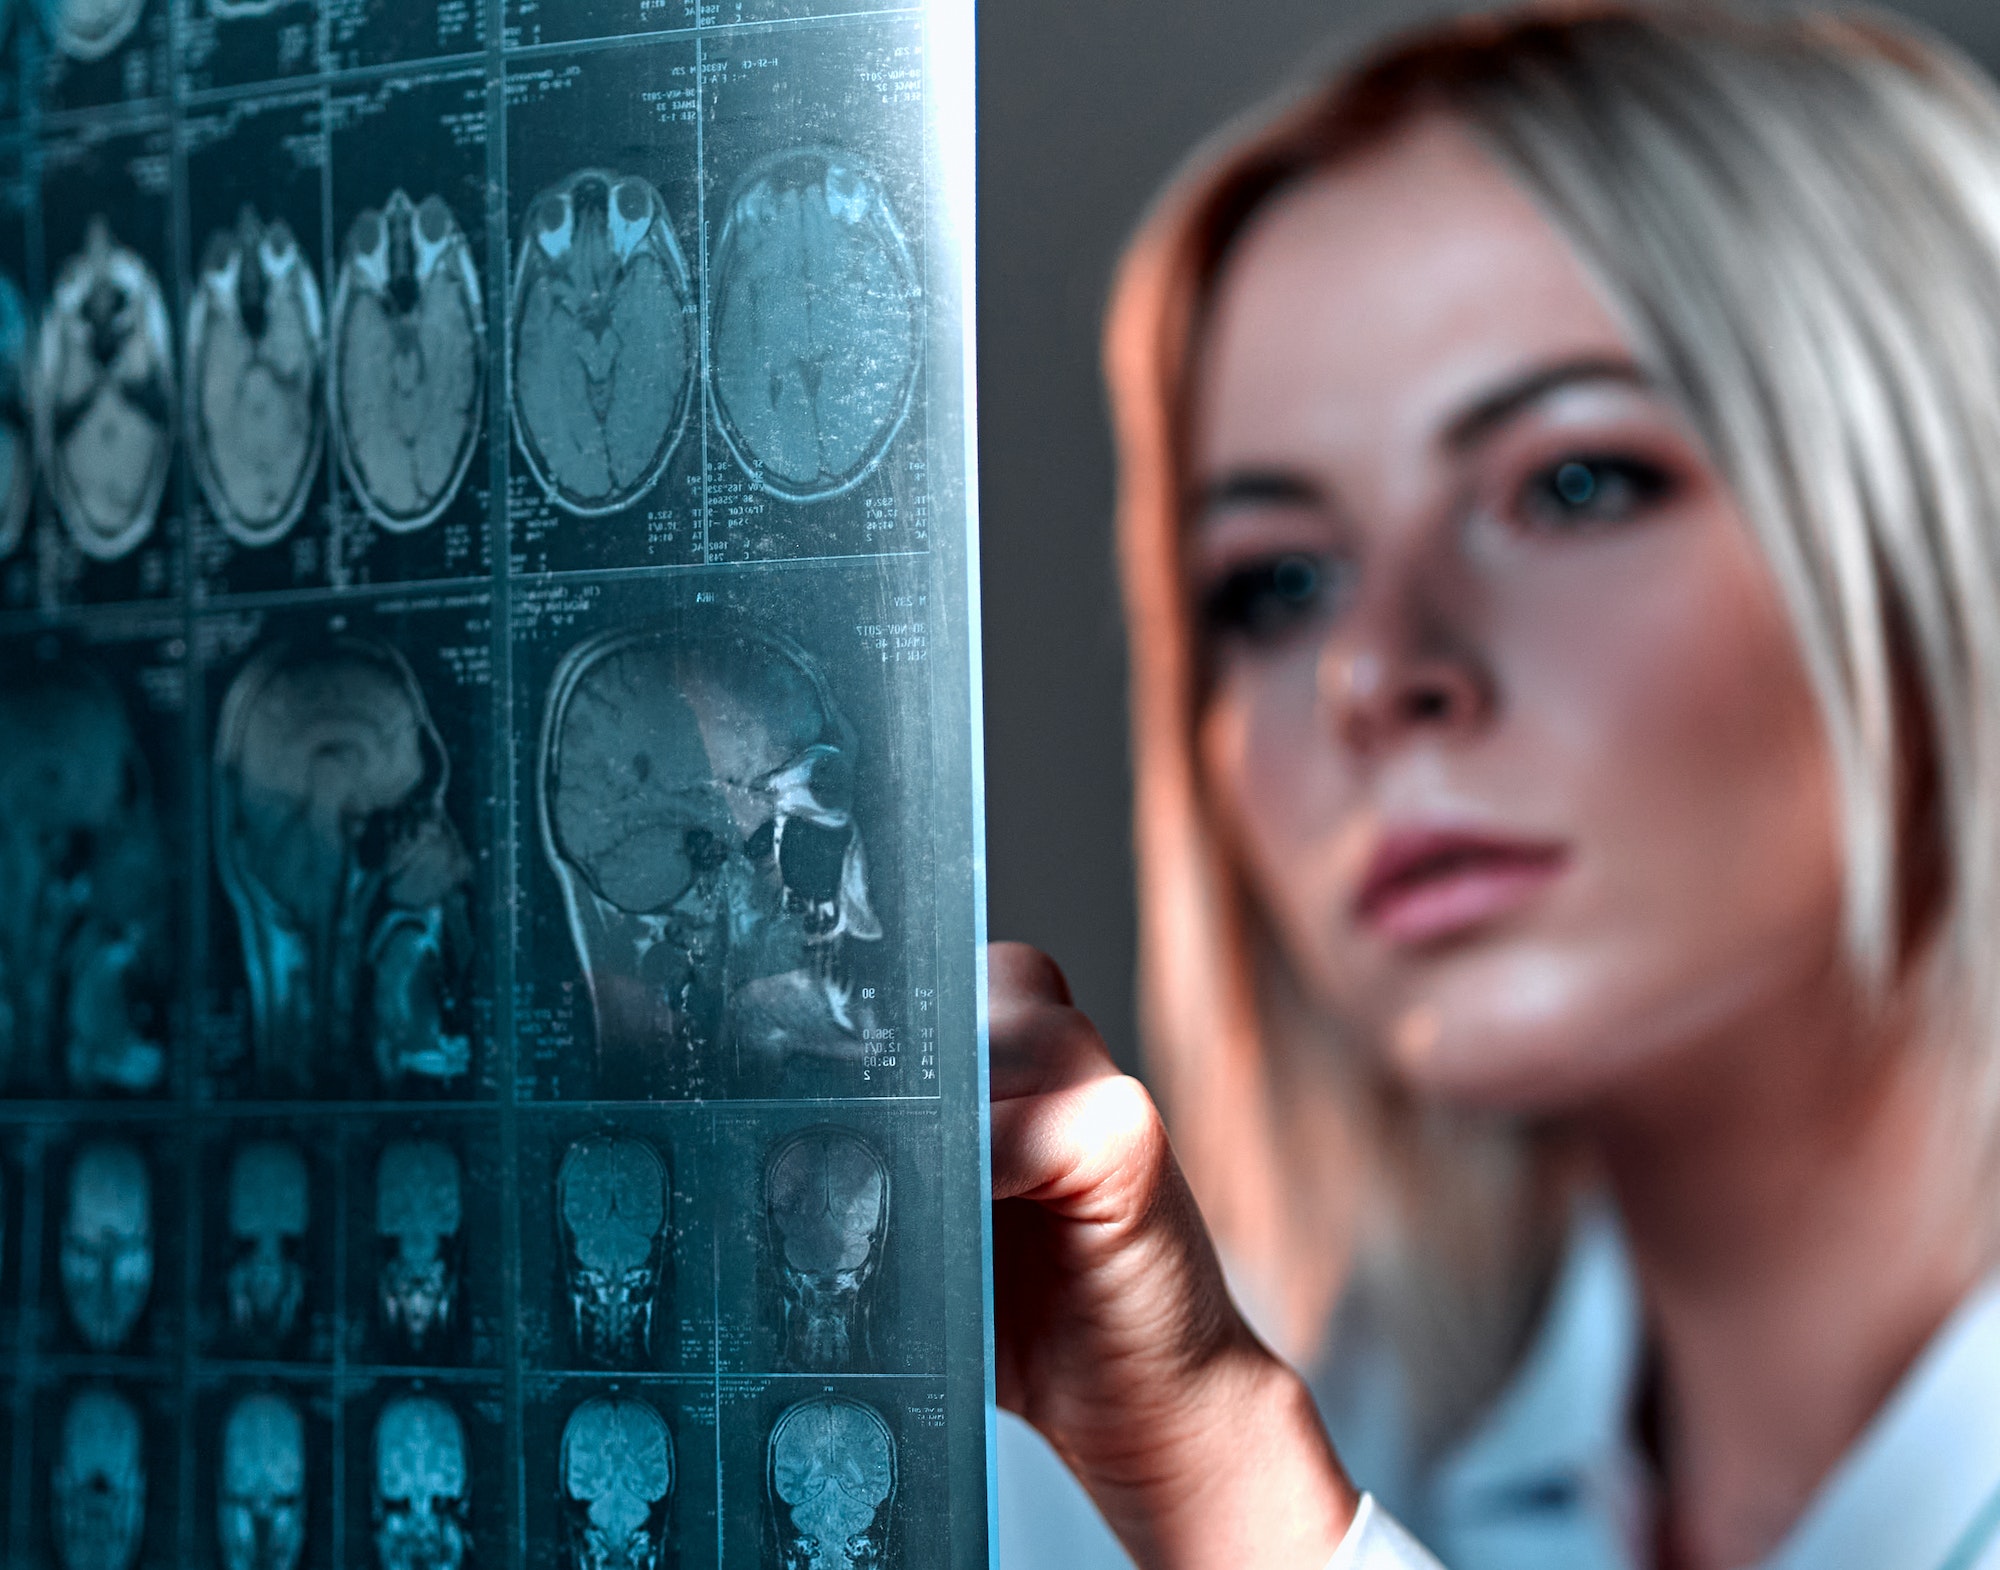 A young blond woman doctor dressed in a white uniform examines an MRI of the brain.